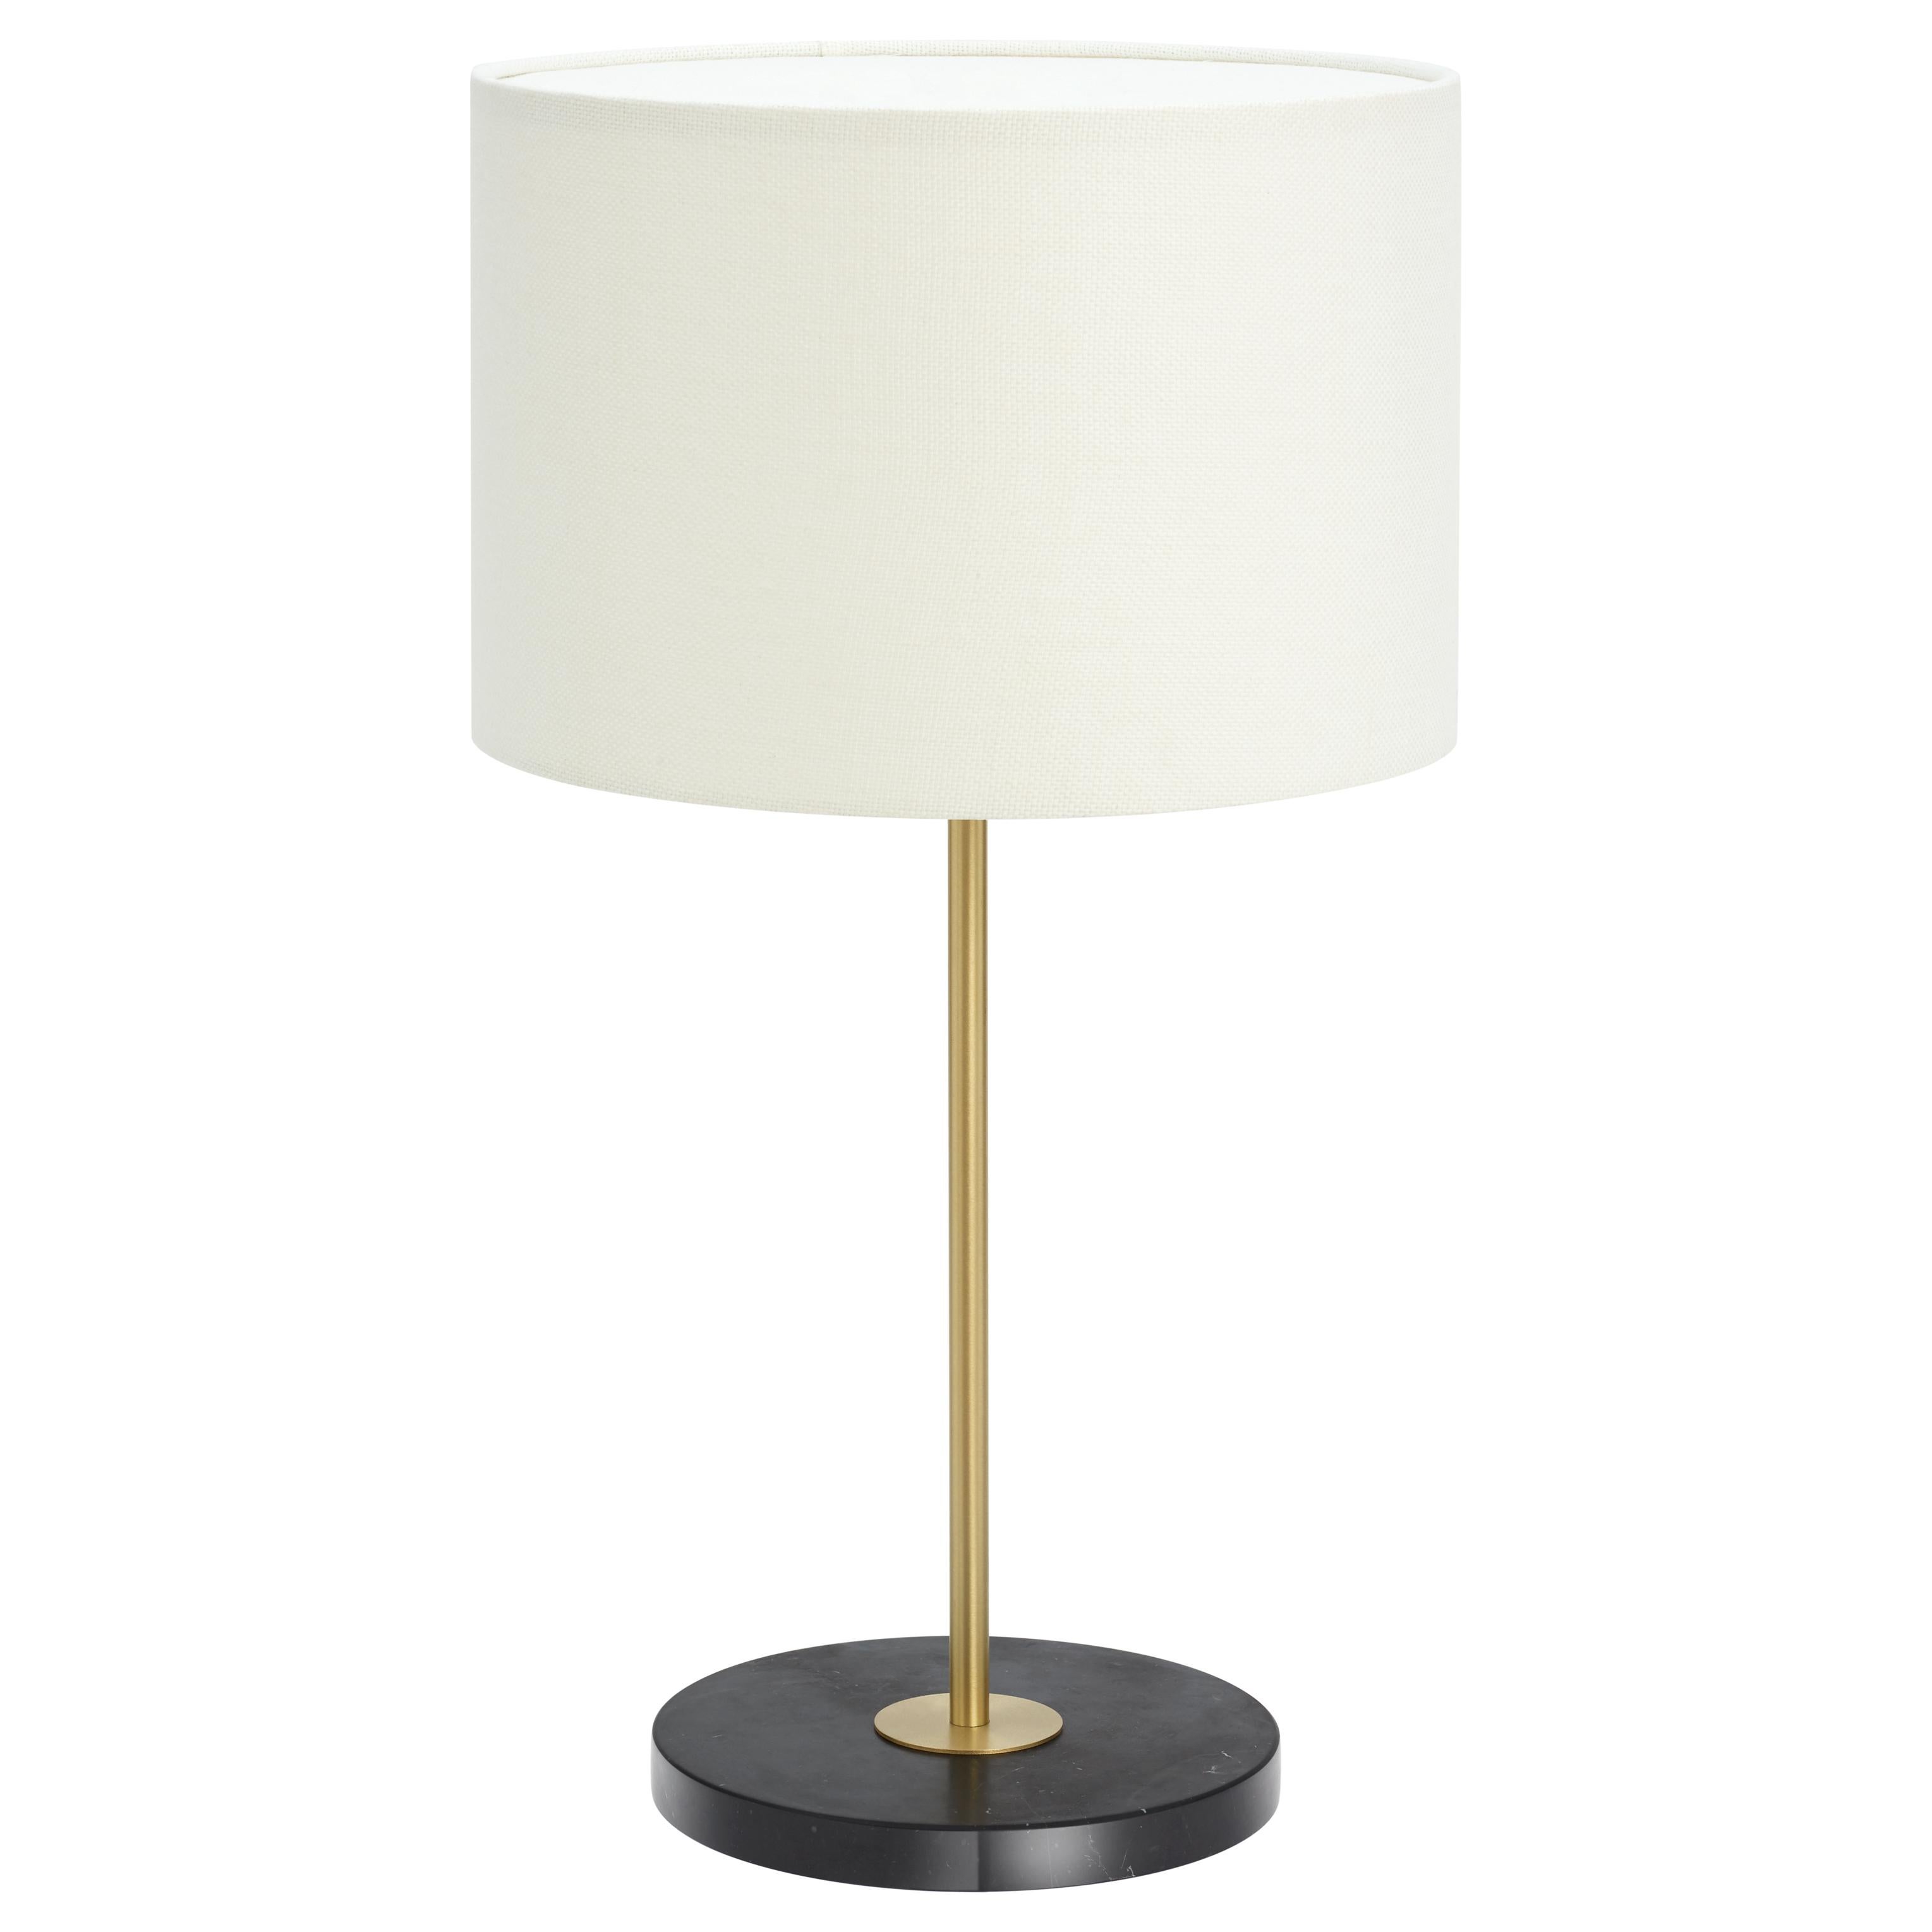 Black Marquina marble Mayfair table lamp by CTO Lighting
Materials: Polished black Marquina marble base with satin brass and white linen shade
Dimensions: 29 x H 66 cm

All our lamps can be wired according to each country. If sold to the USA it will